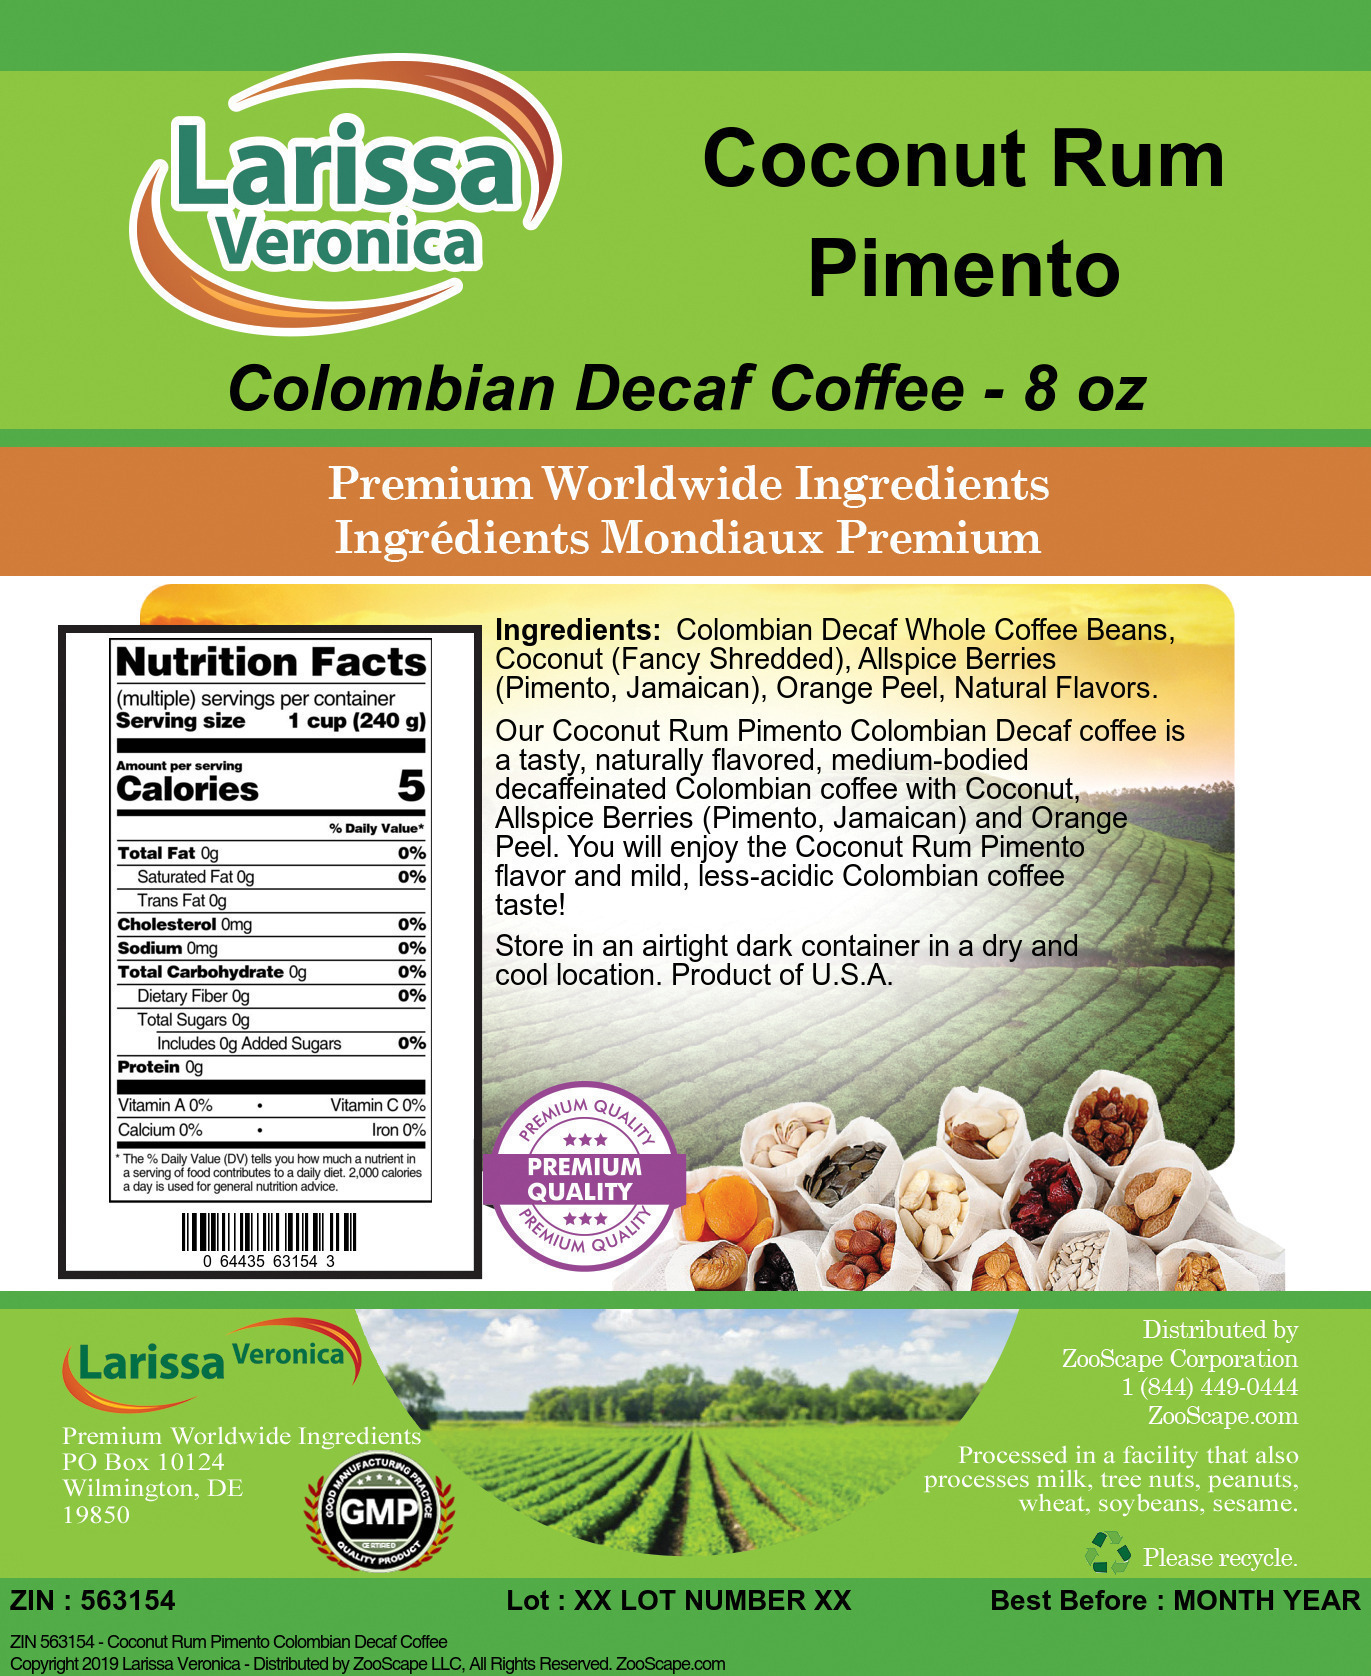 Coconut Rum Pimento Colombian Decaf Coffee - Label